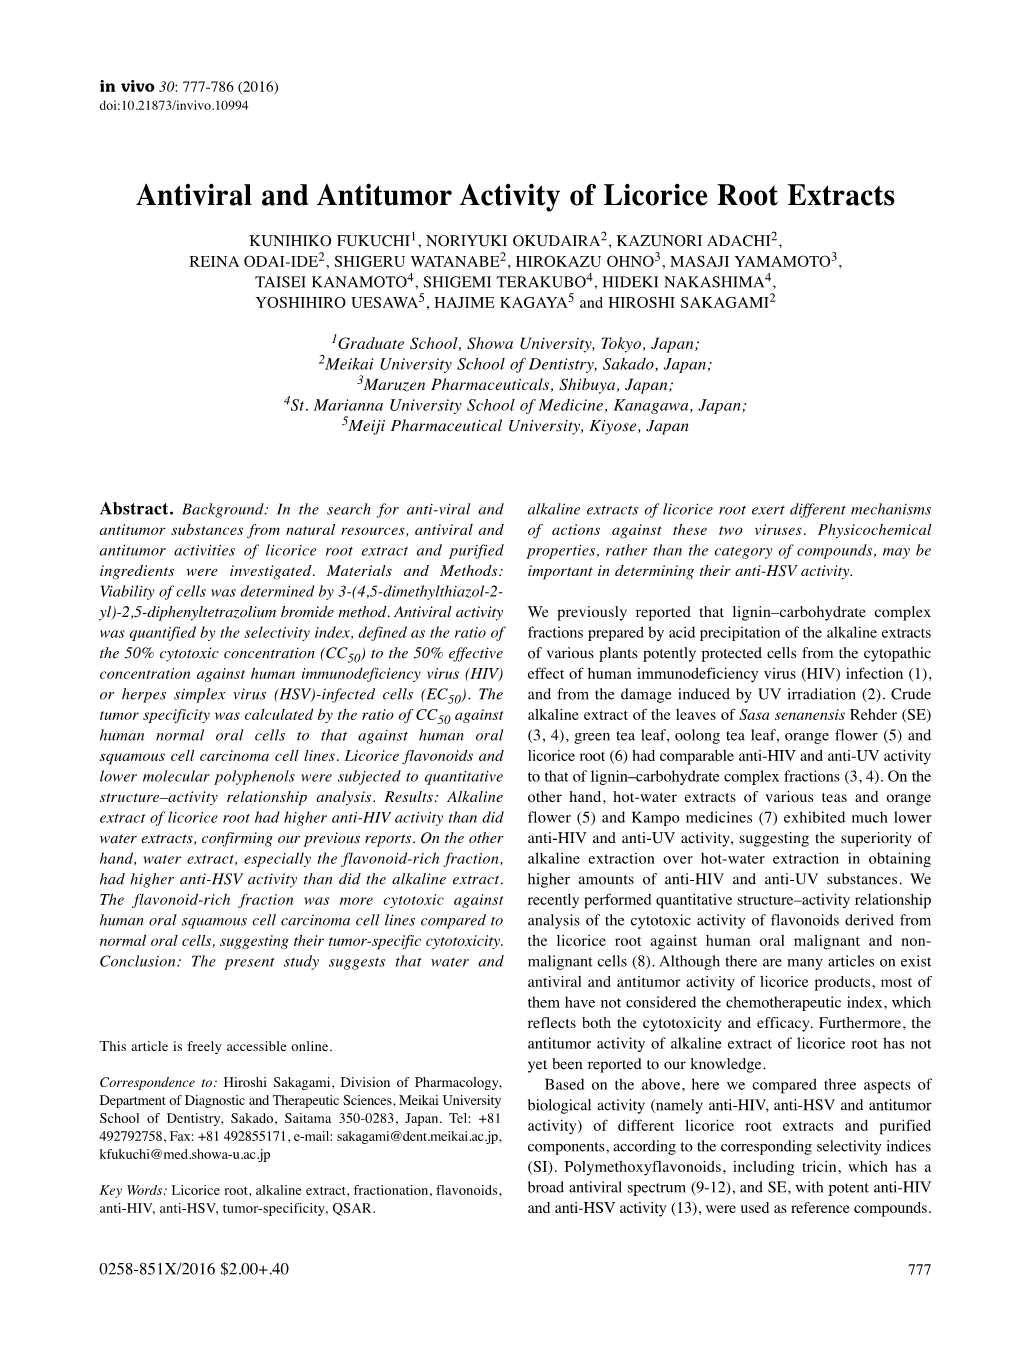 Antiviral and Antitumor Activity of Licorice Root Extracts